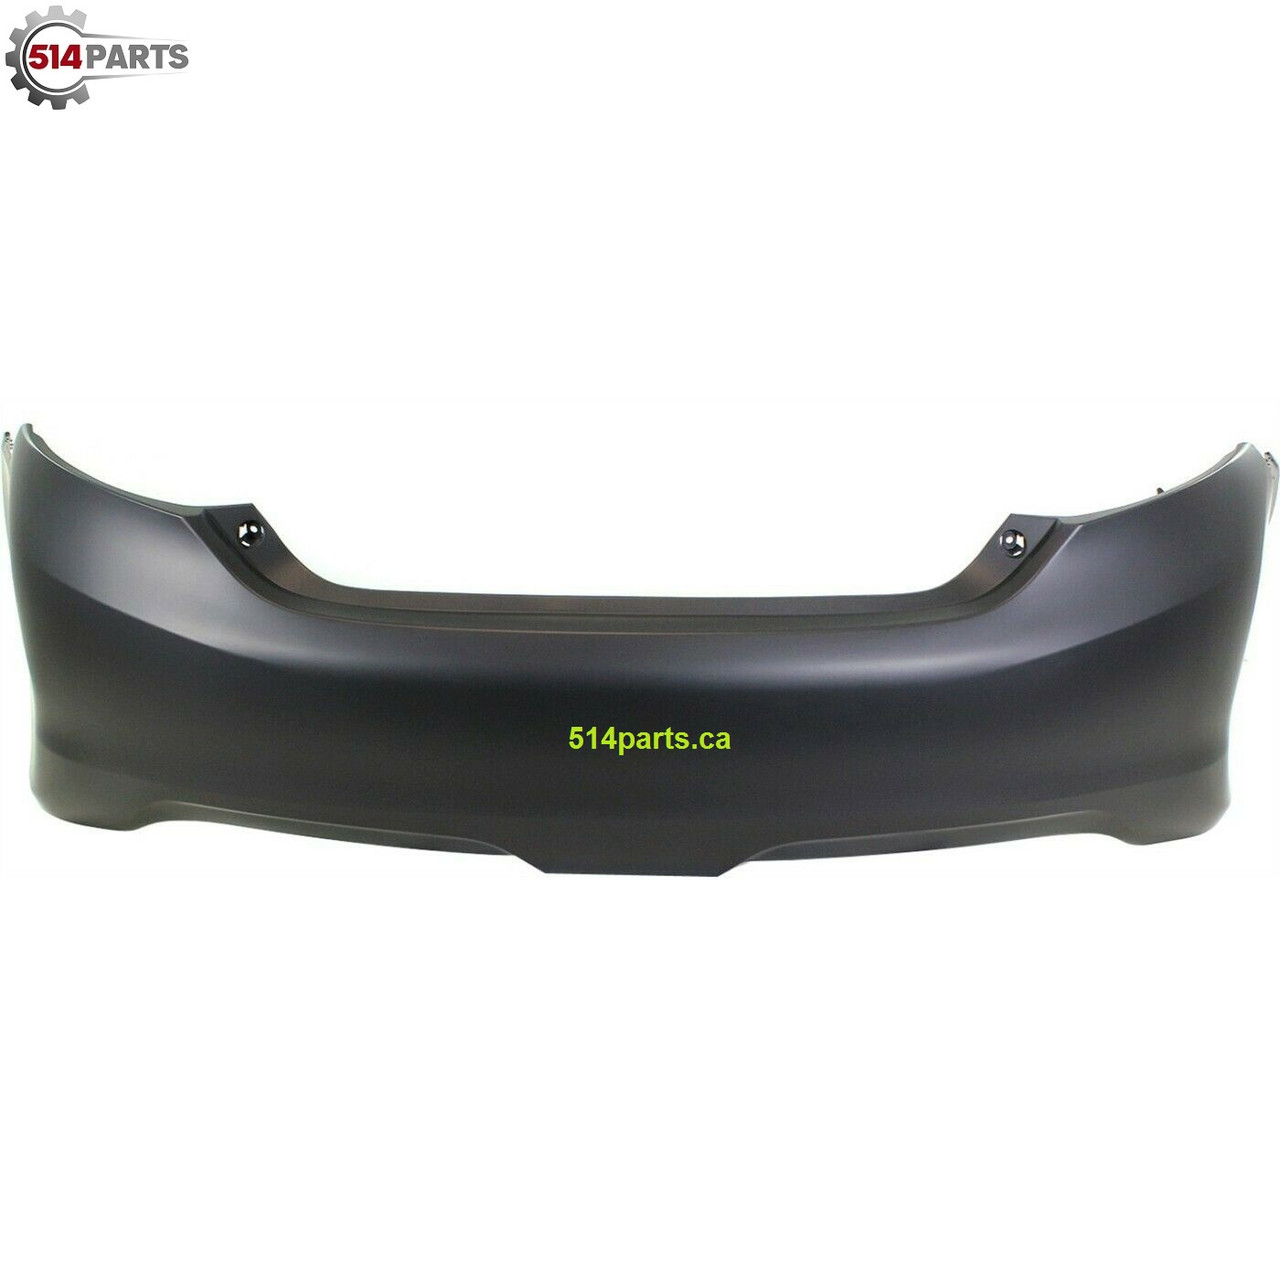 2012 - 2014 TOYOTA CAMRY and CAMRY HYBRID SE MODELS ONLY REAR BUMPER COVER - PARE-CHOC ARRIERE POUR LES MODELES SE